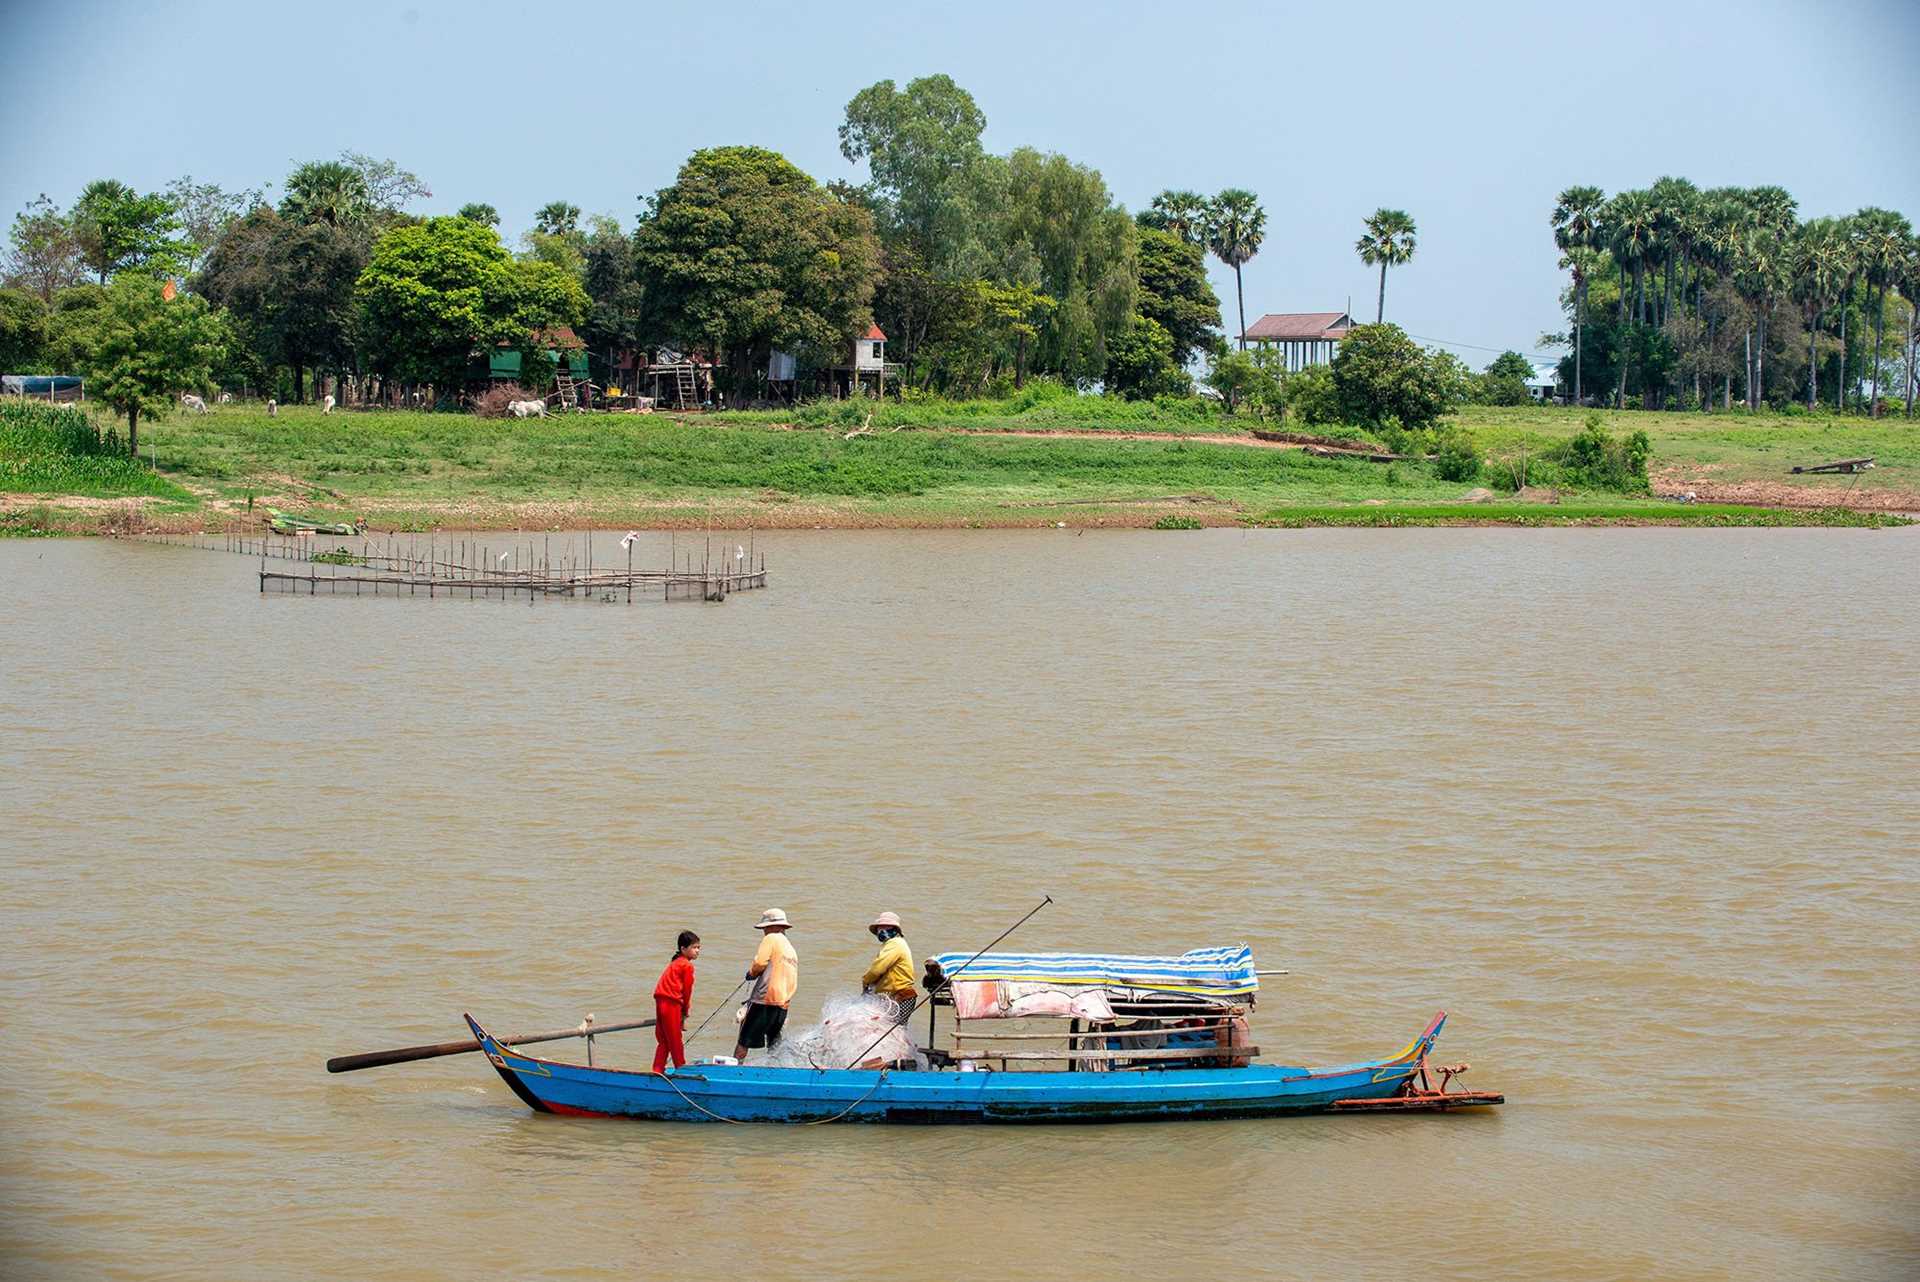 blue fishing boat on a large brown river